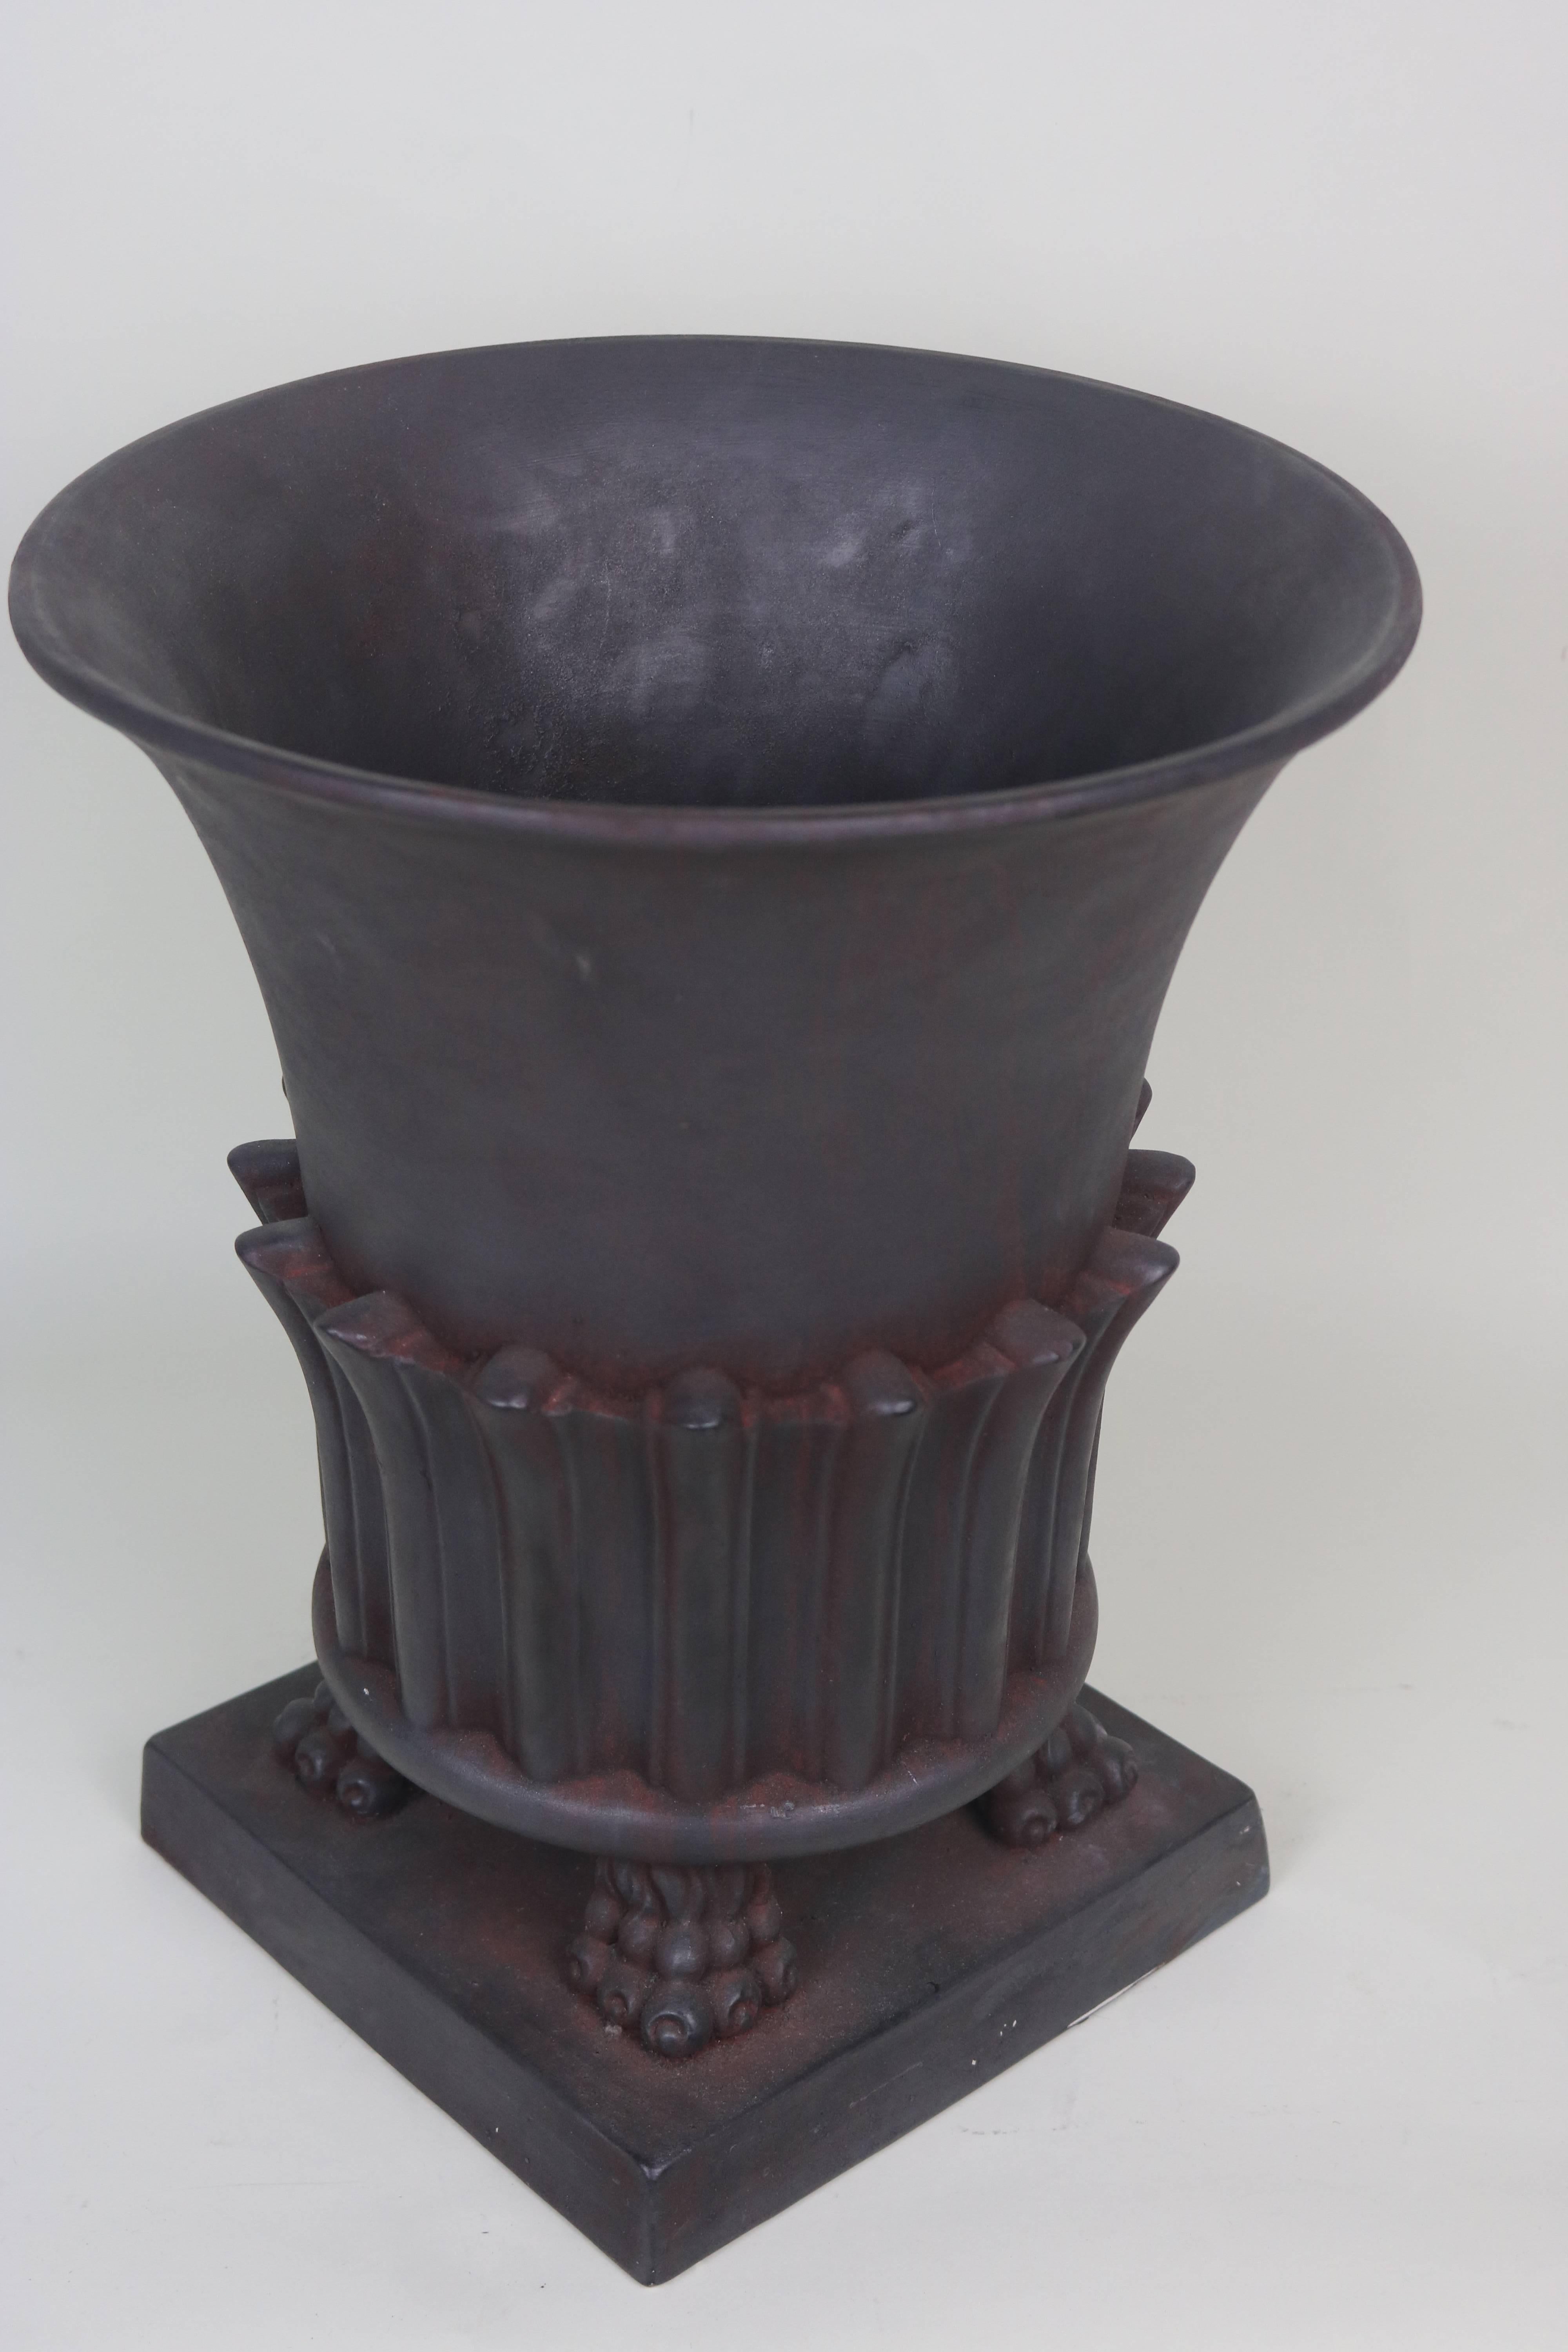 An impressive power urn for an eclectic or modern interior!
1950s  Classical Greco-Roman style urn-Terra Cotta bisque matte black finish with rusticated undercoat- this elegant urn features paw feet and nicely defined classical details.
Very large